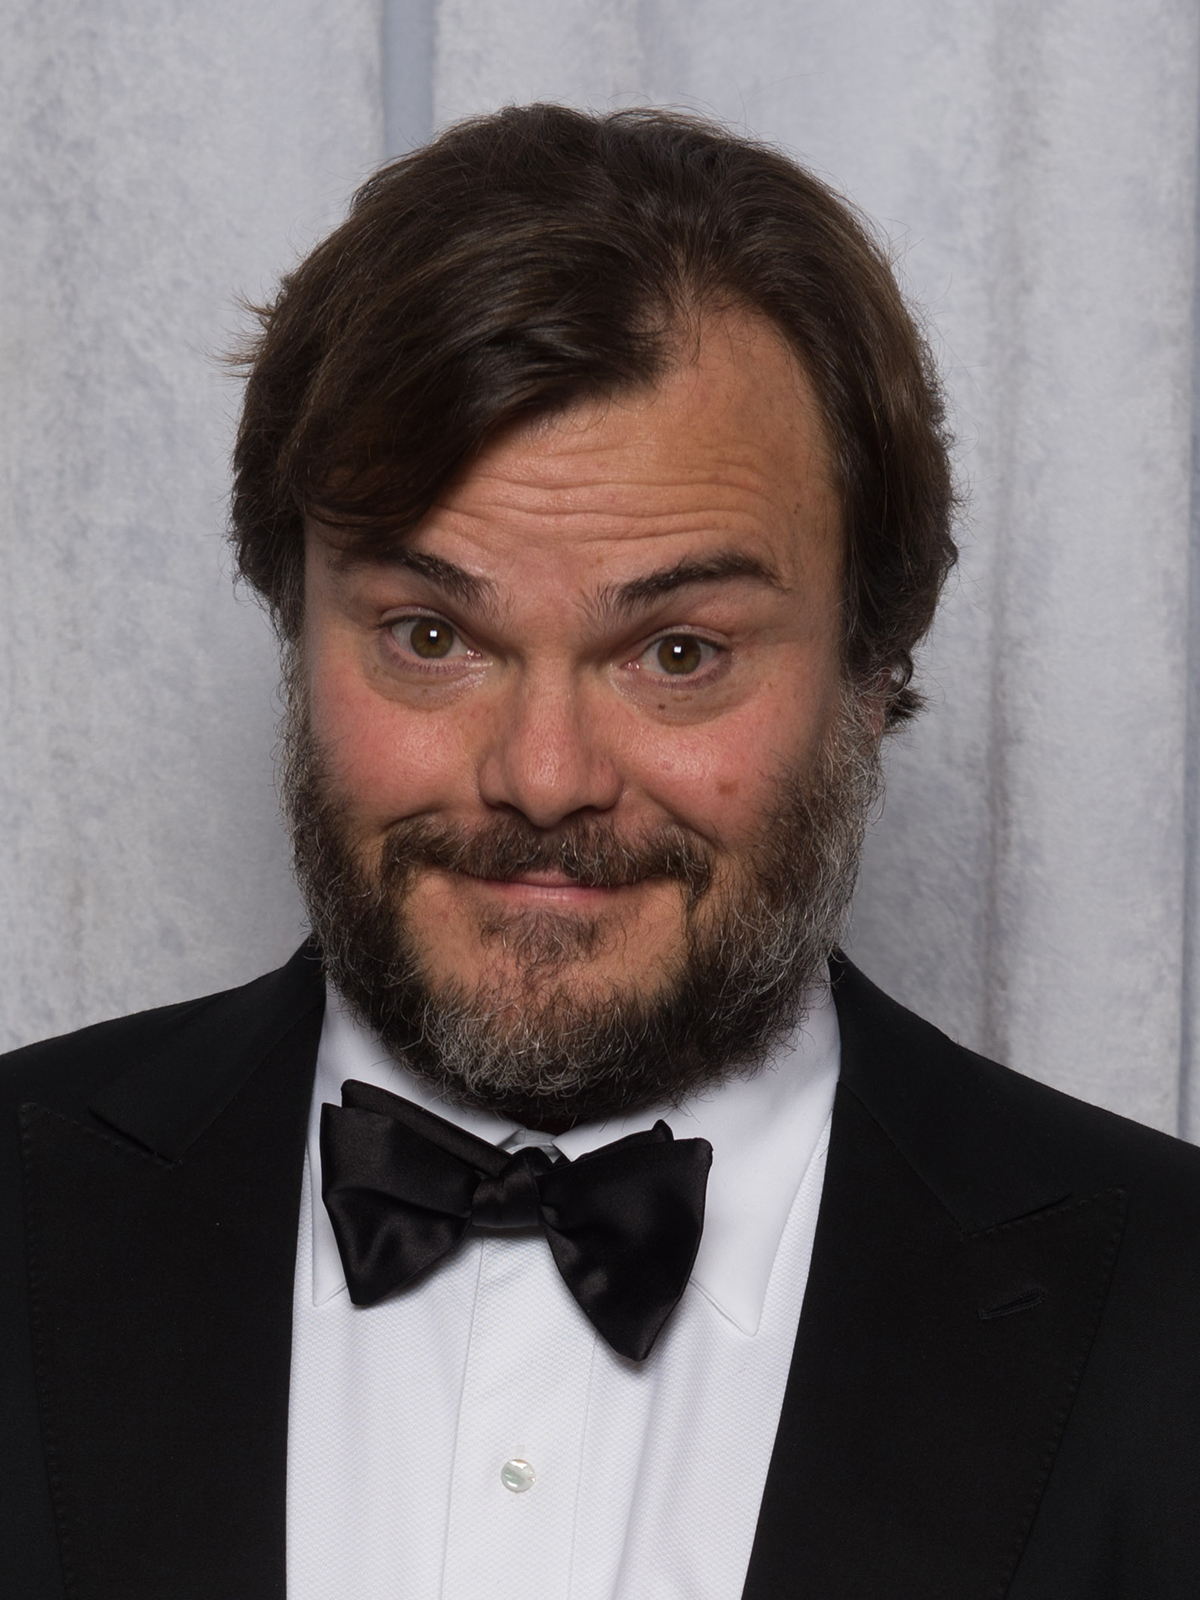 Watch Jack Black in his first ever acting role